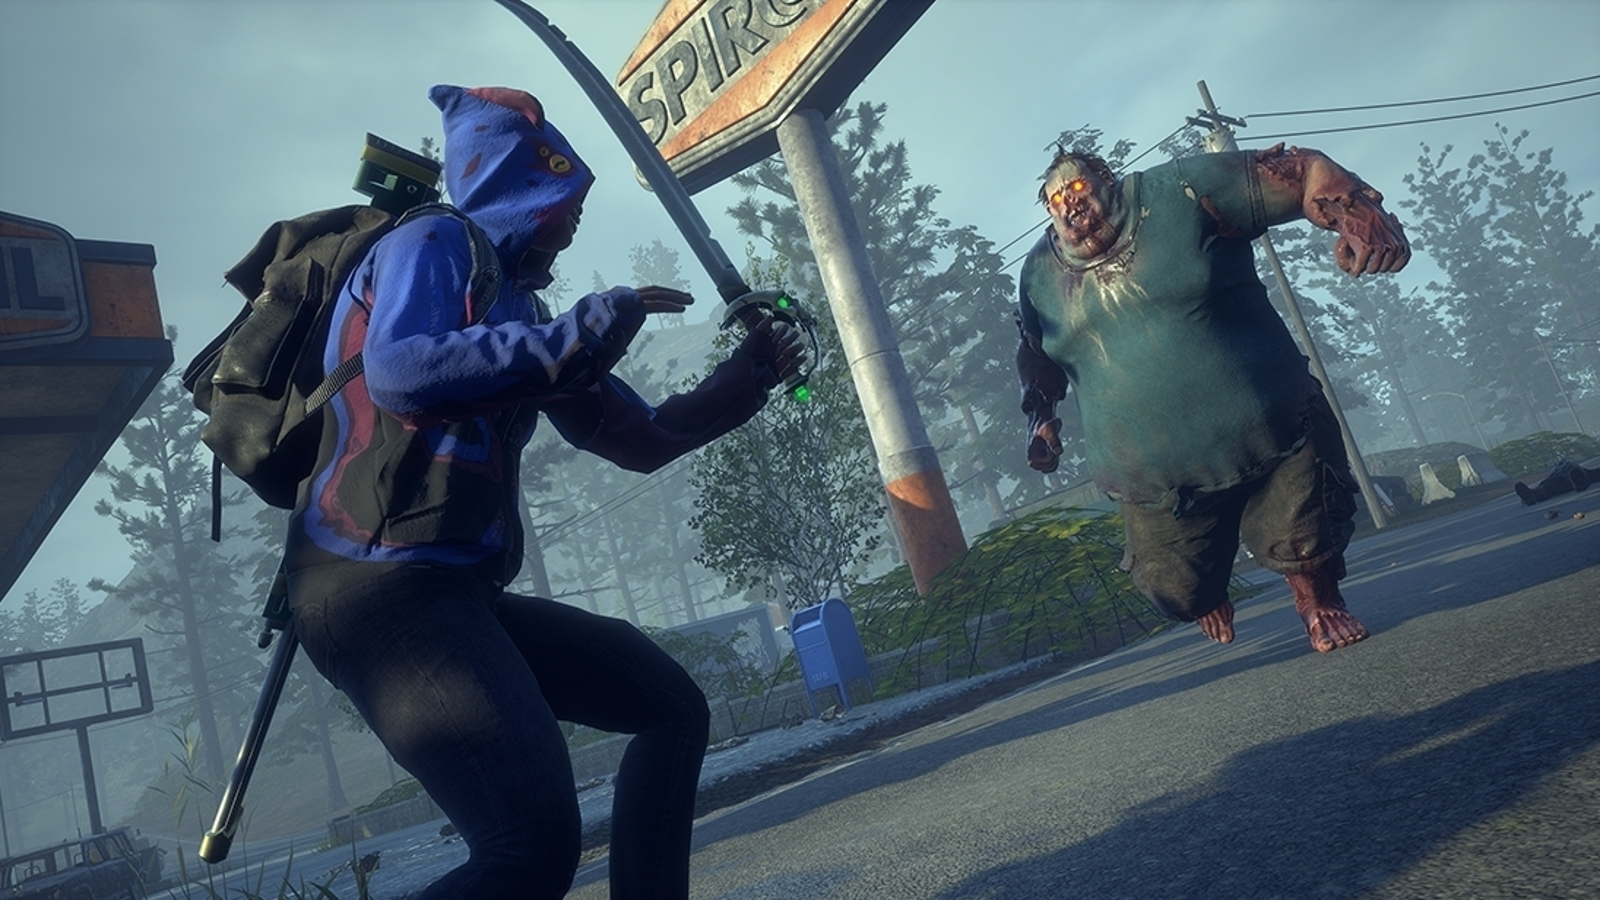 State of Decay 2's Green Zone is a relaxed, accessible apocalypse